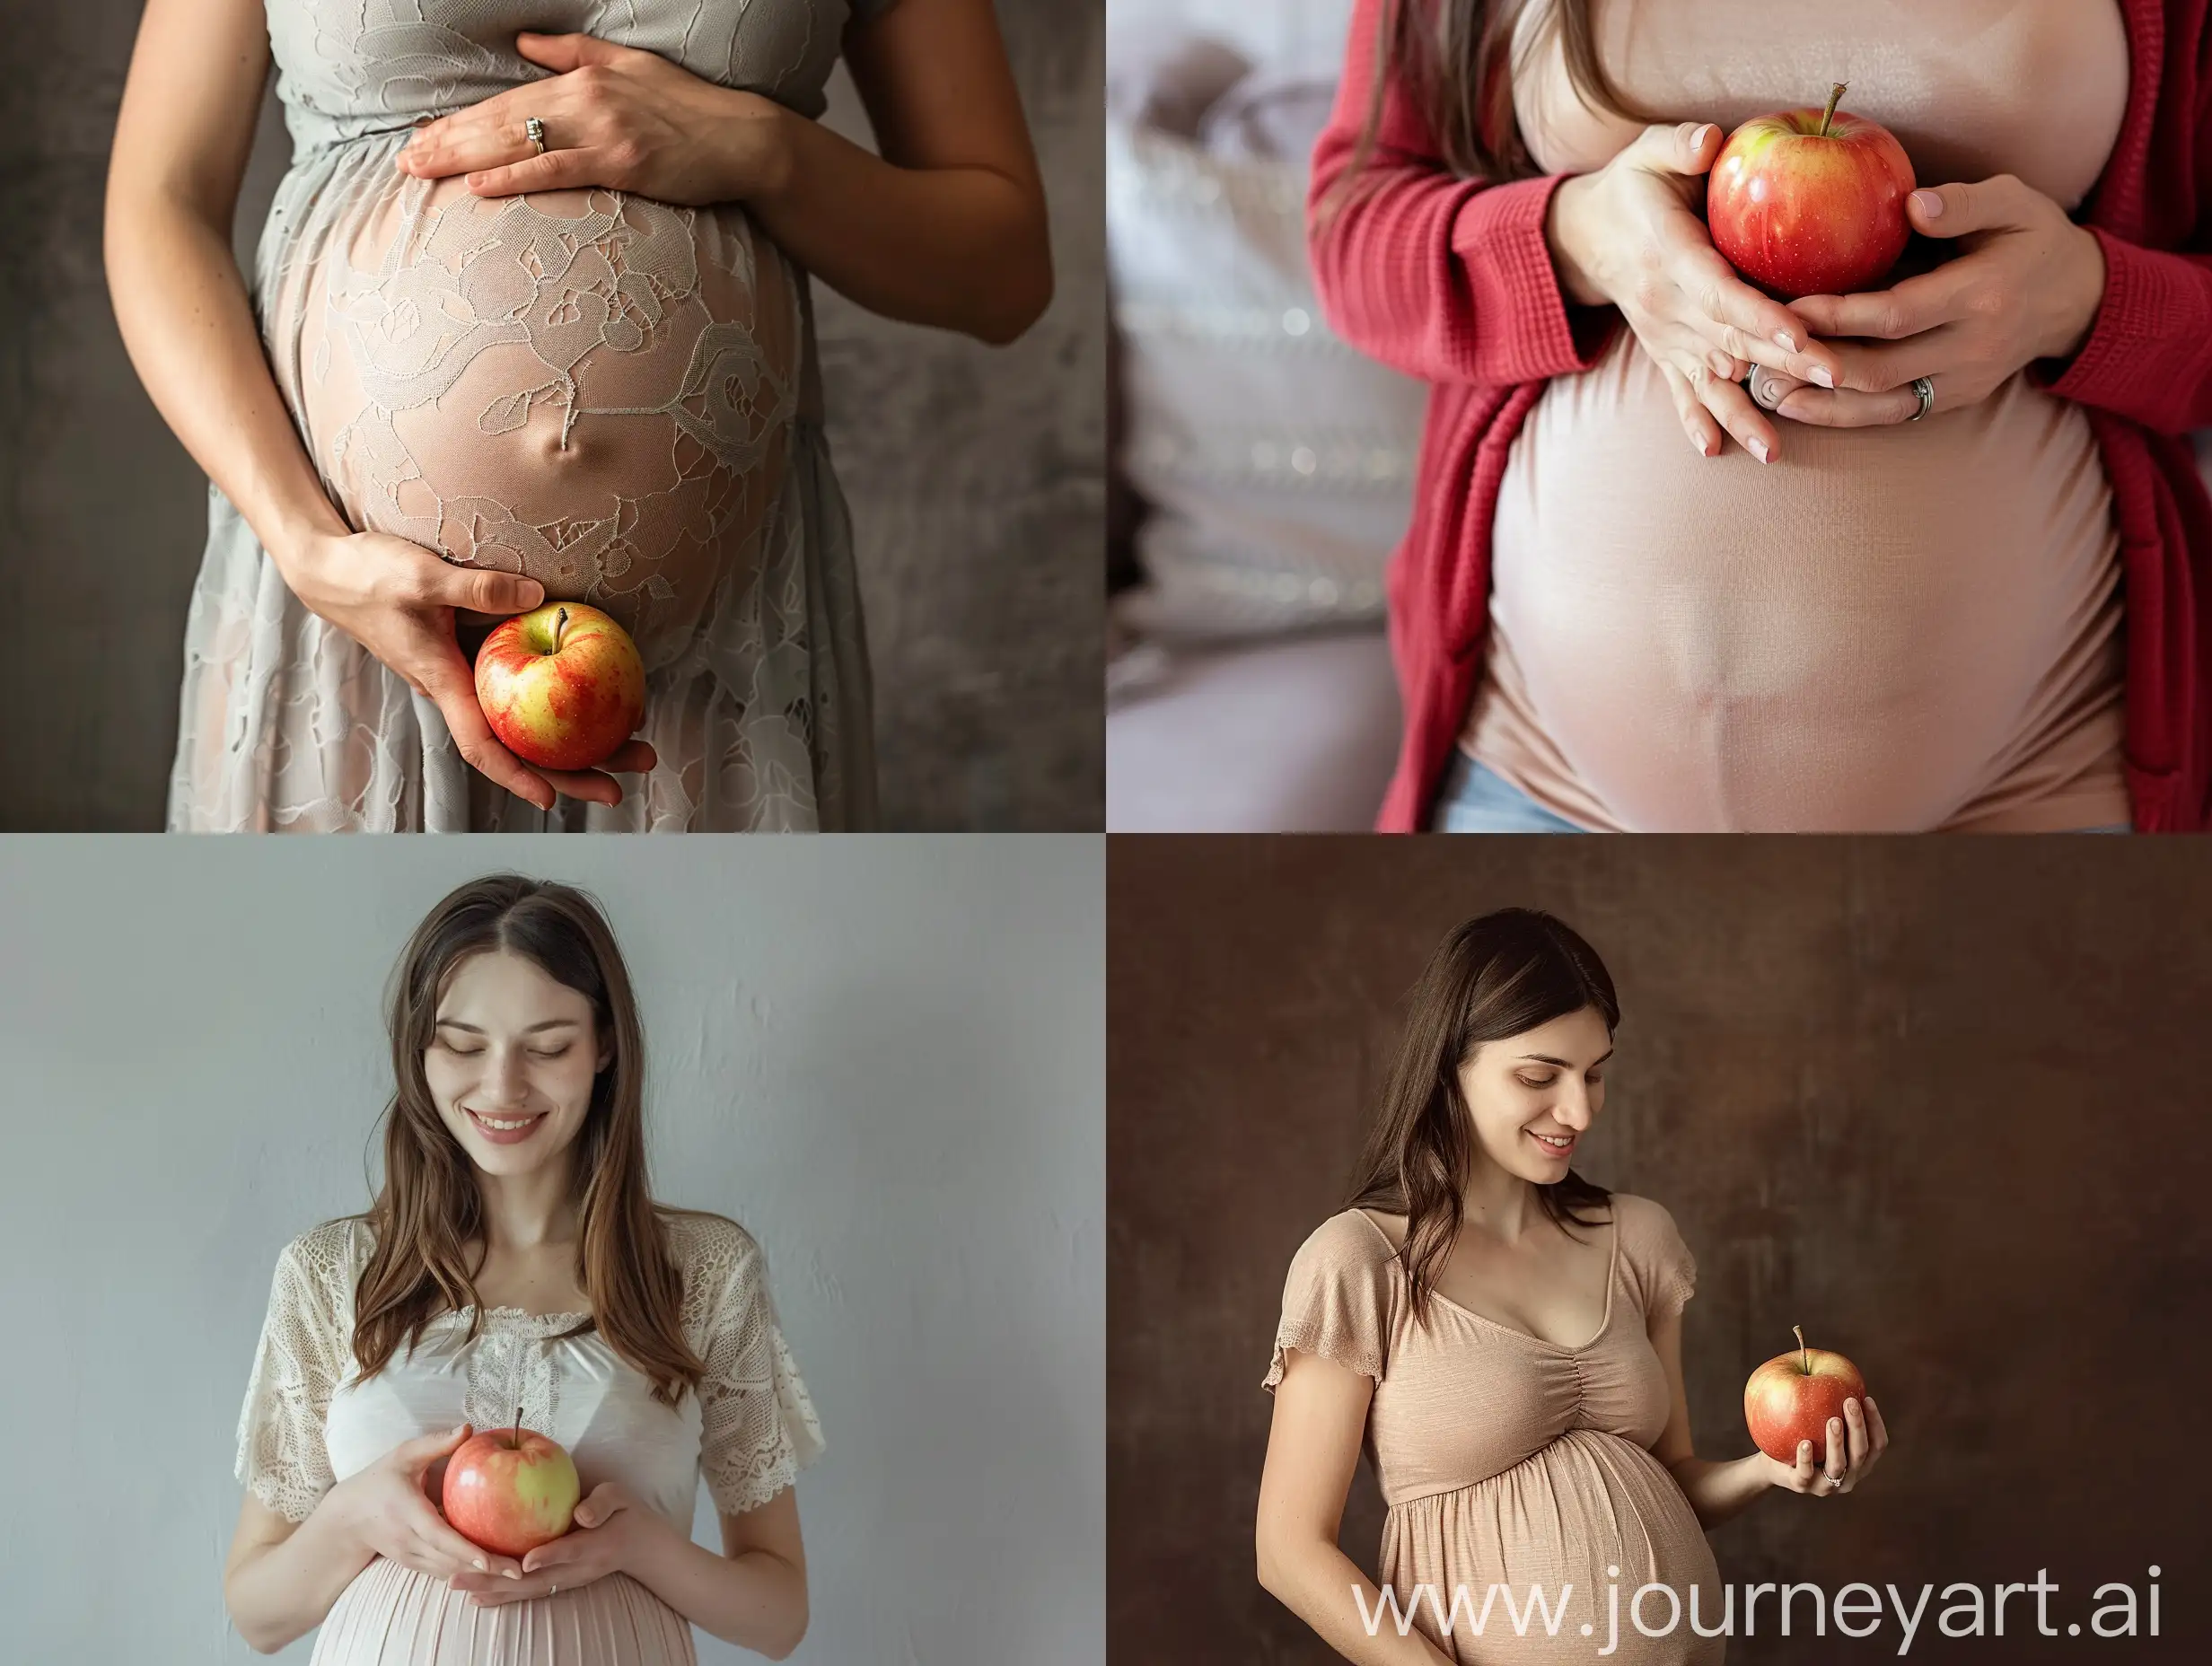 A photo of a pregnant woman holding an apple